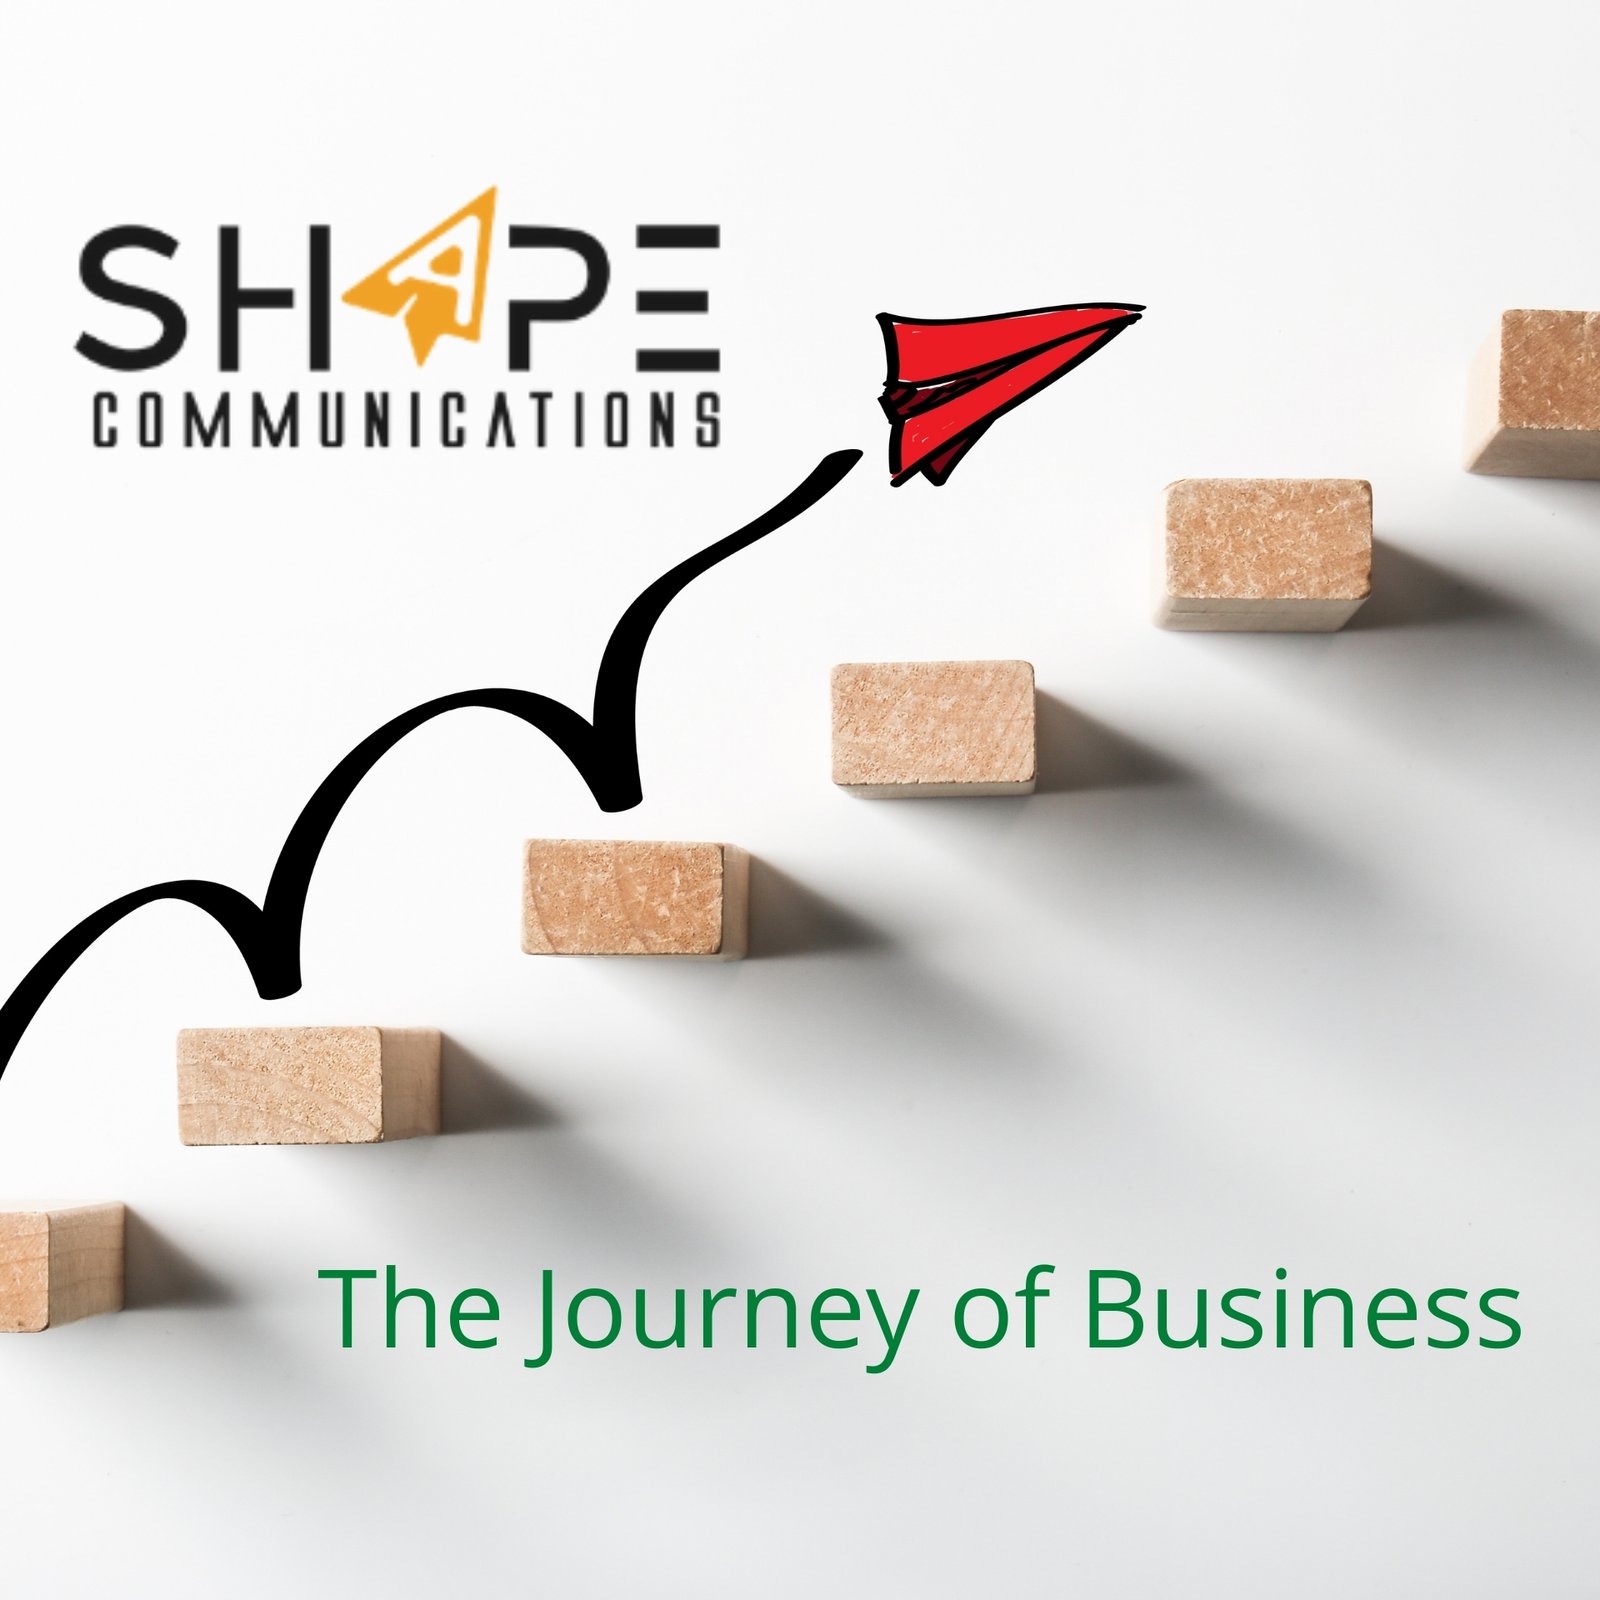 The journey of Business – First Class